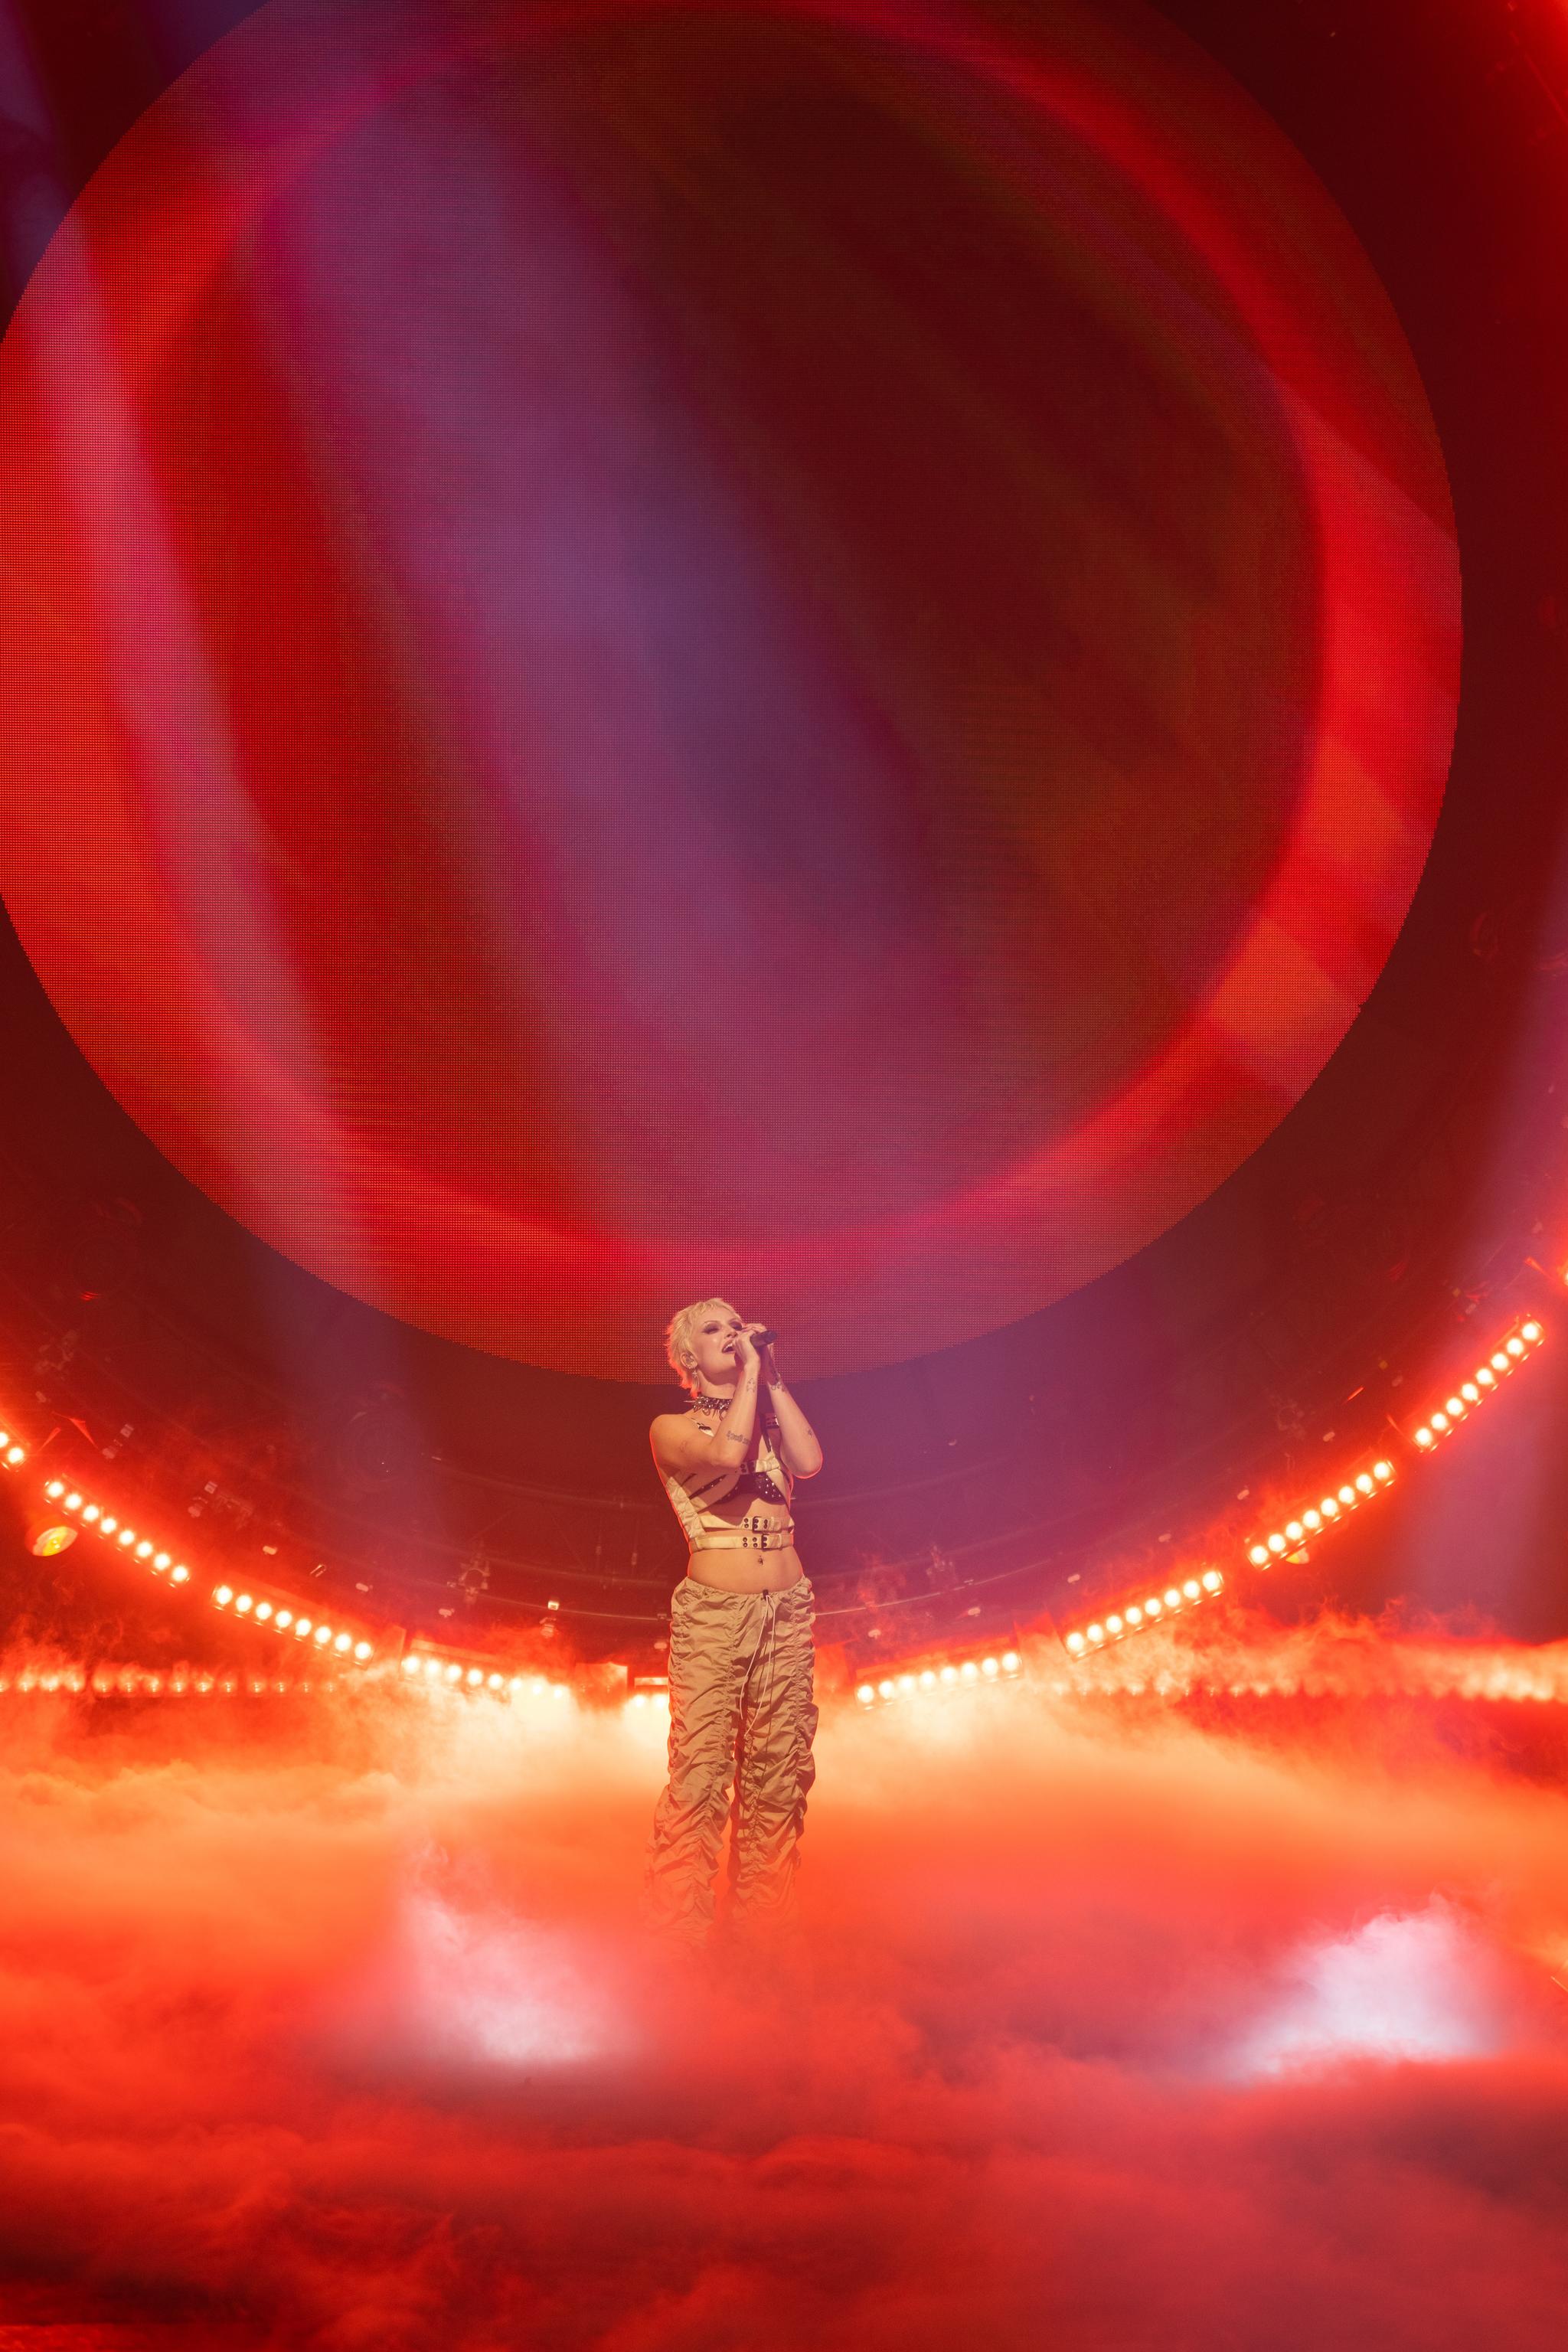 The singer Cassyette performs in front of a large light installation.